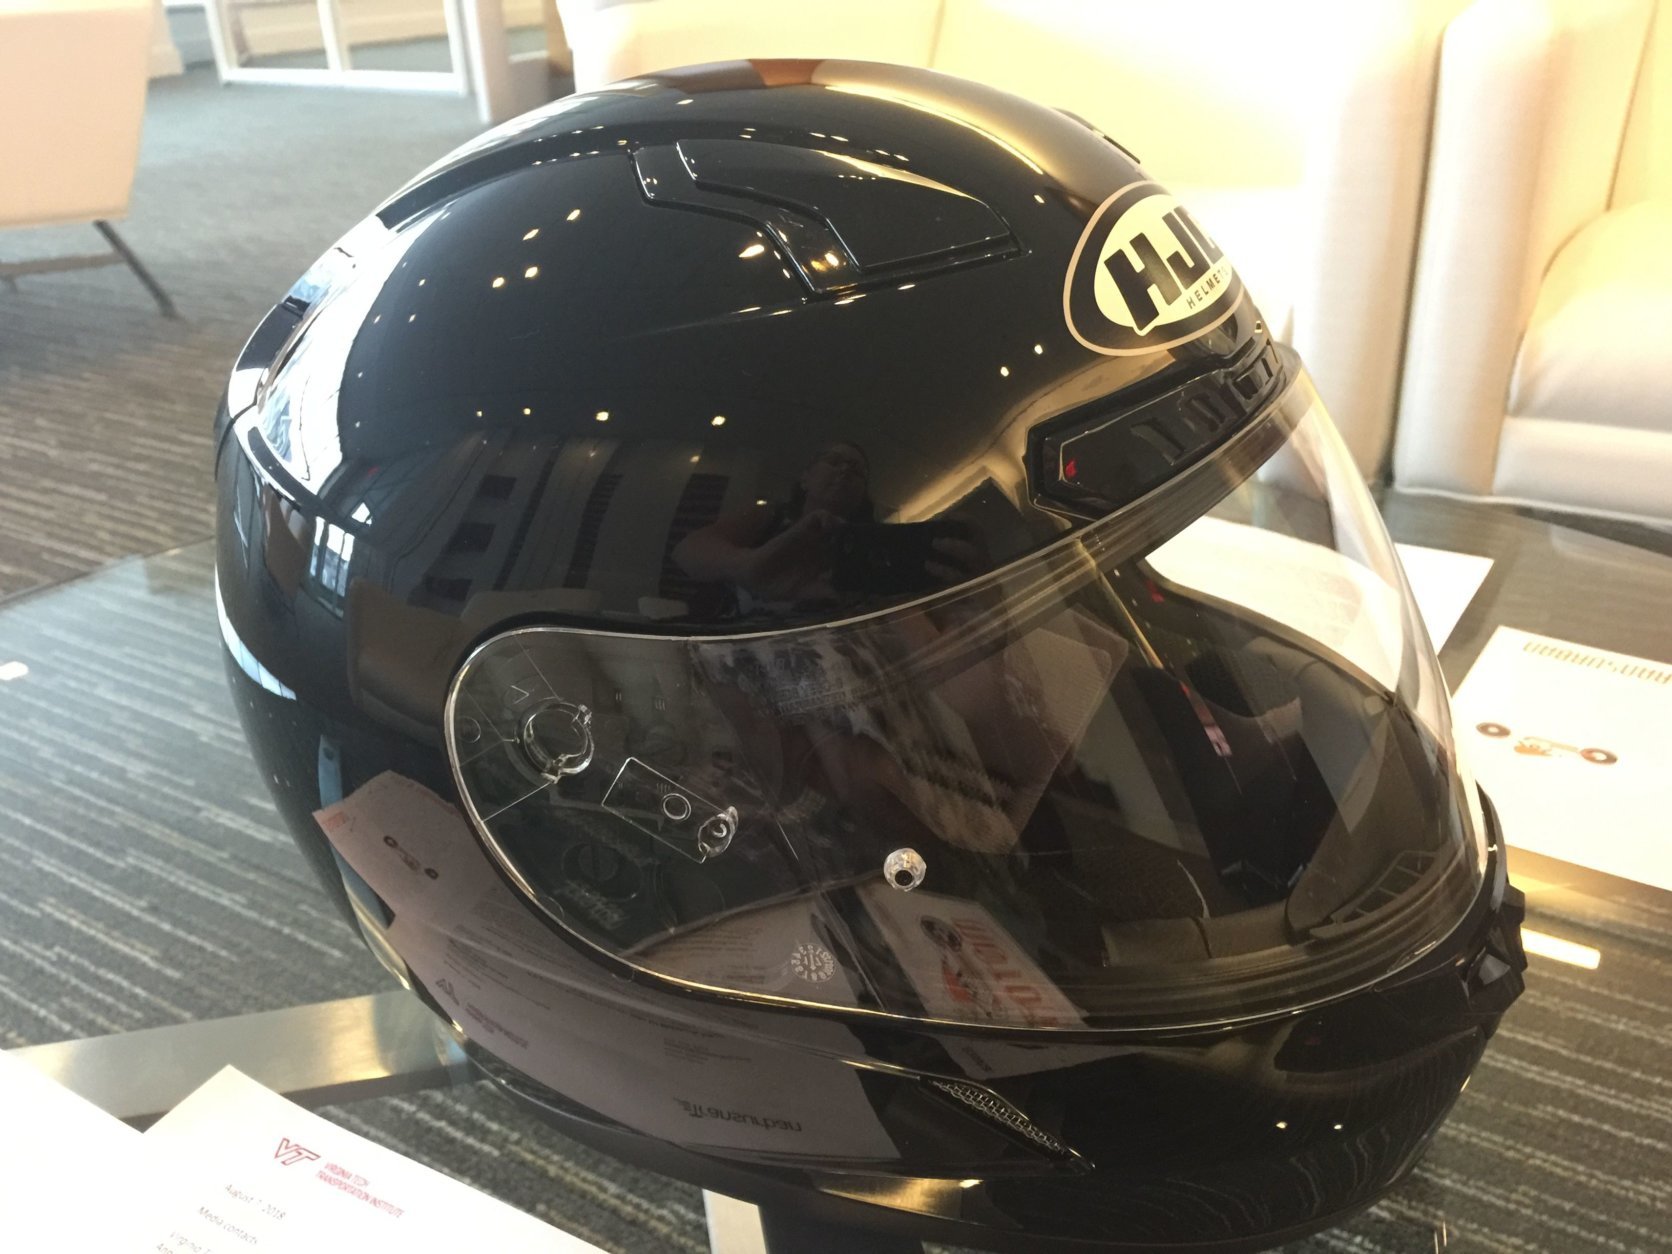 Called "heads up" displays,  the interior of motorcycle helmets may soon be able to display for drivers helpful information about what's on the road ahead. (WTOP/Kristi King)